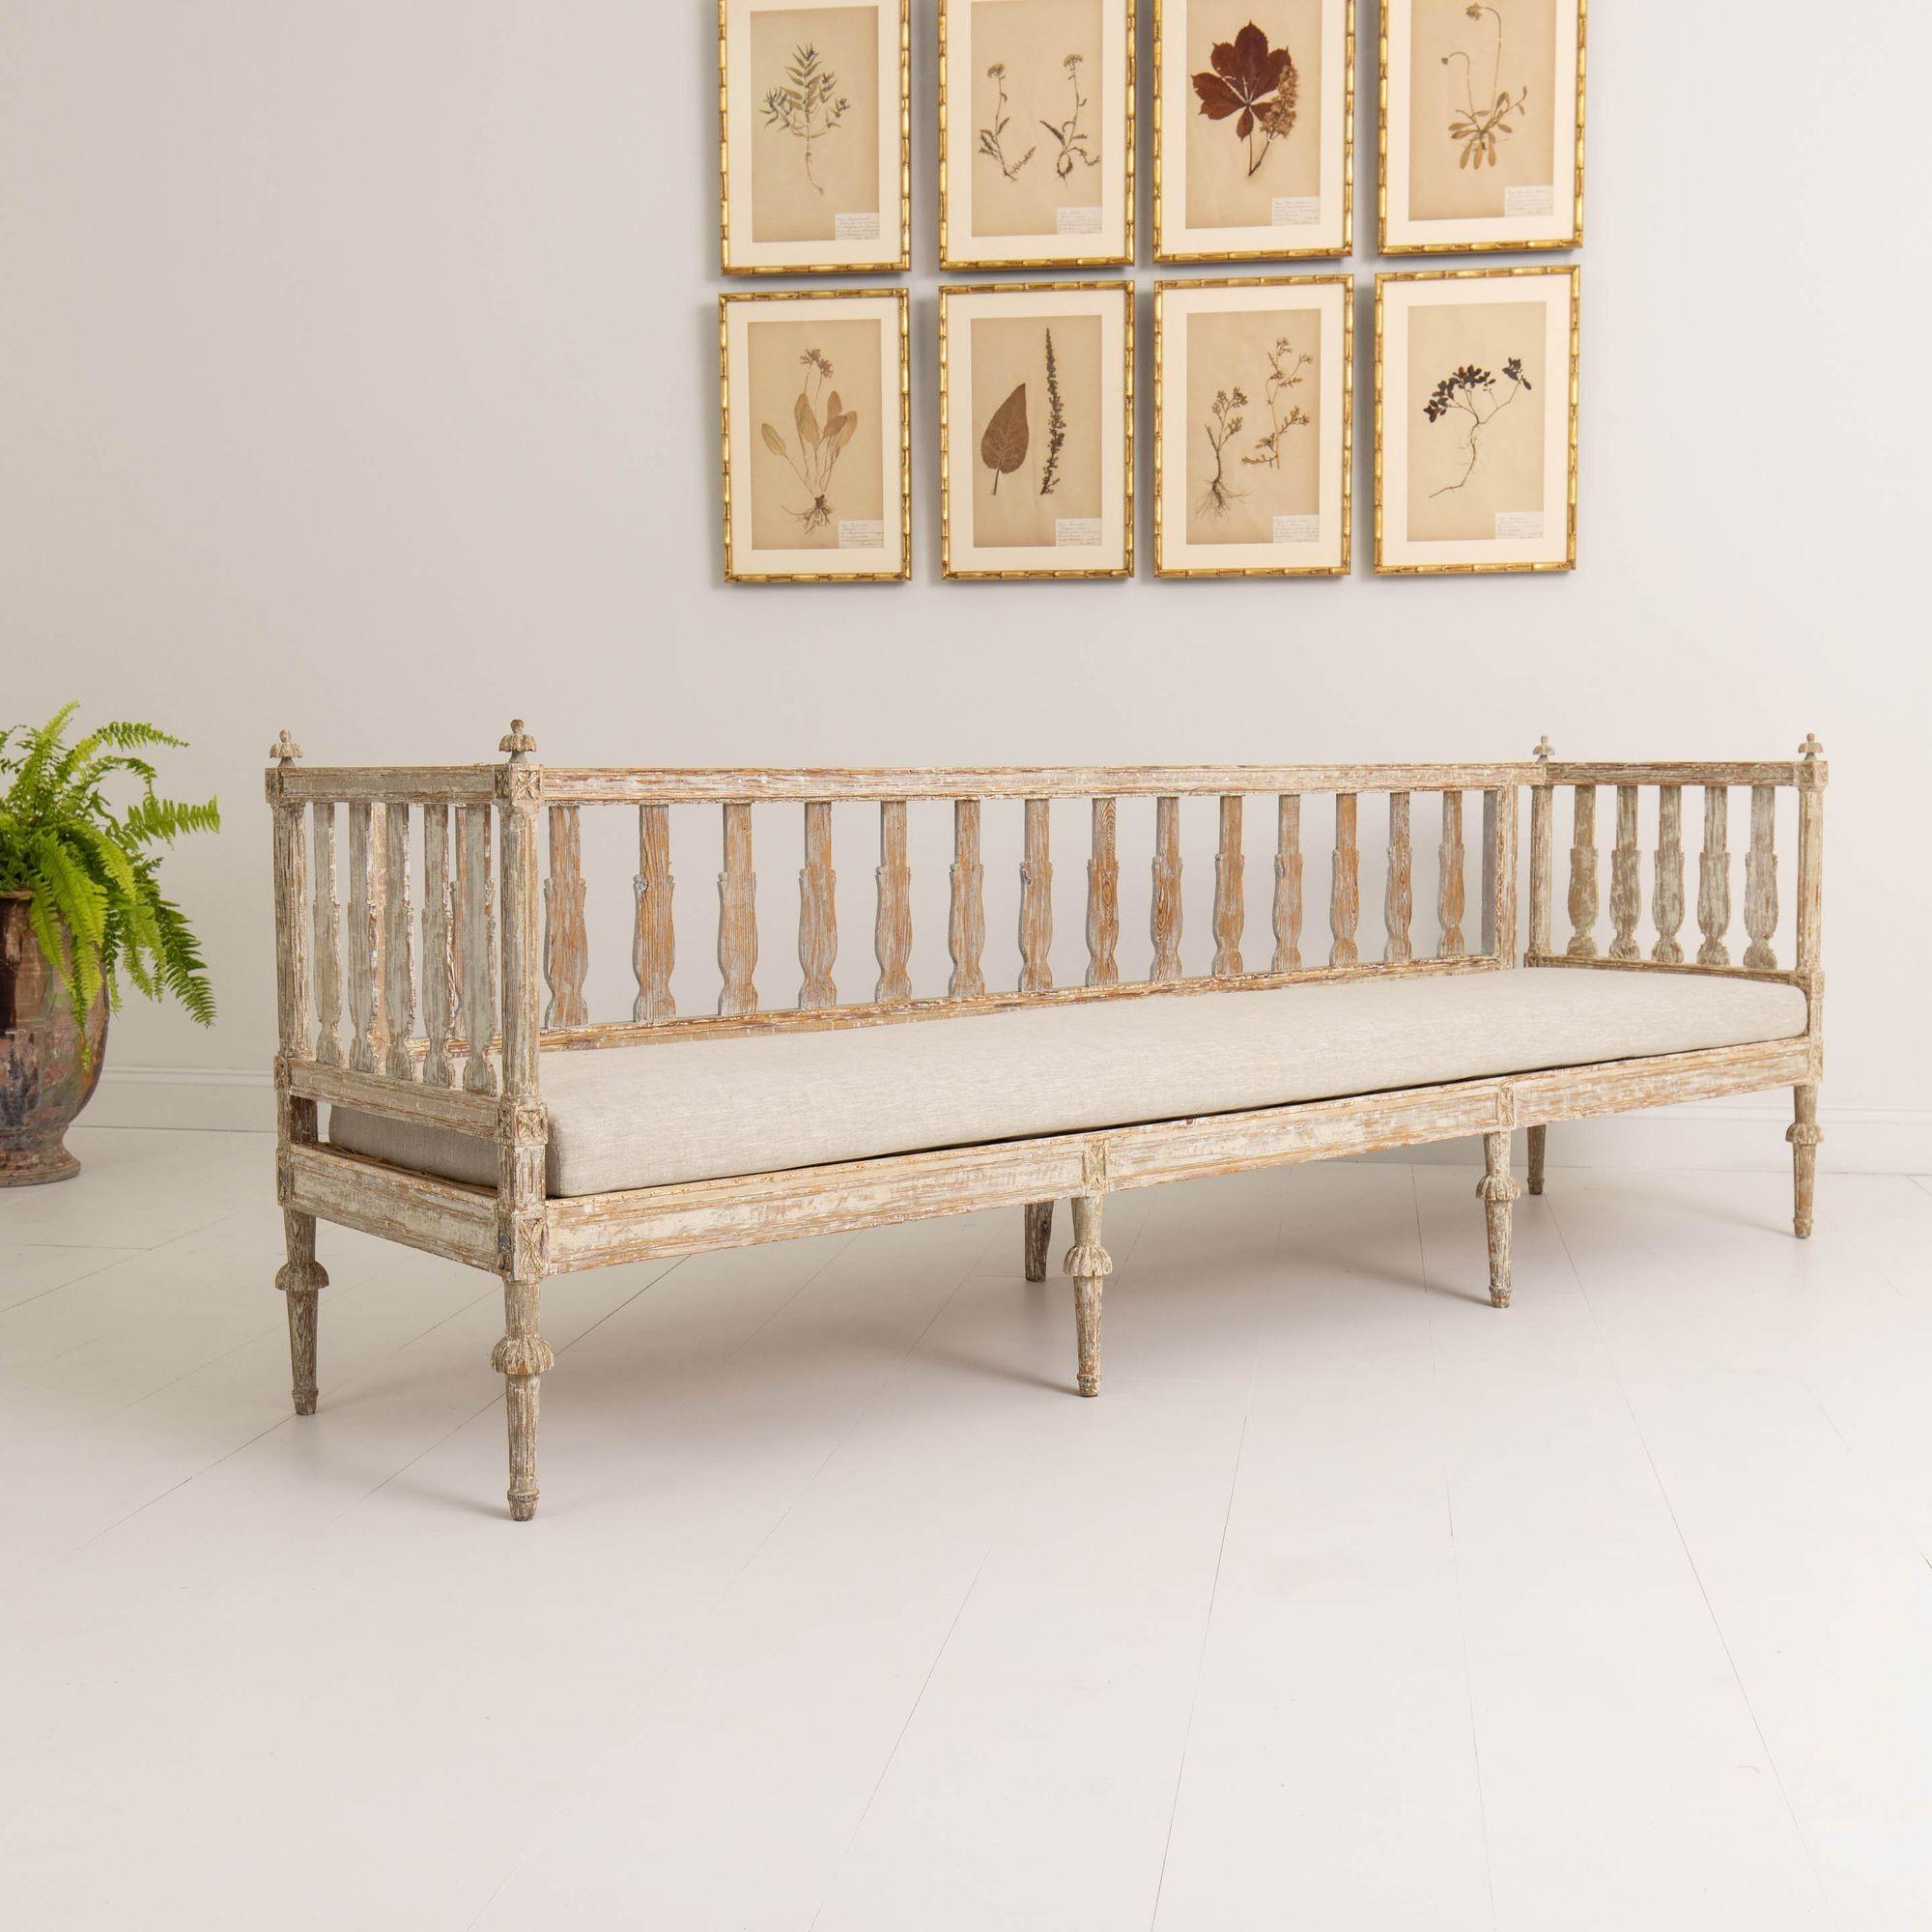 19th c. Swedish Gustavian Period Sofa Bench in Original Paint For Sale 7